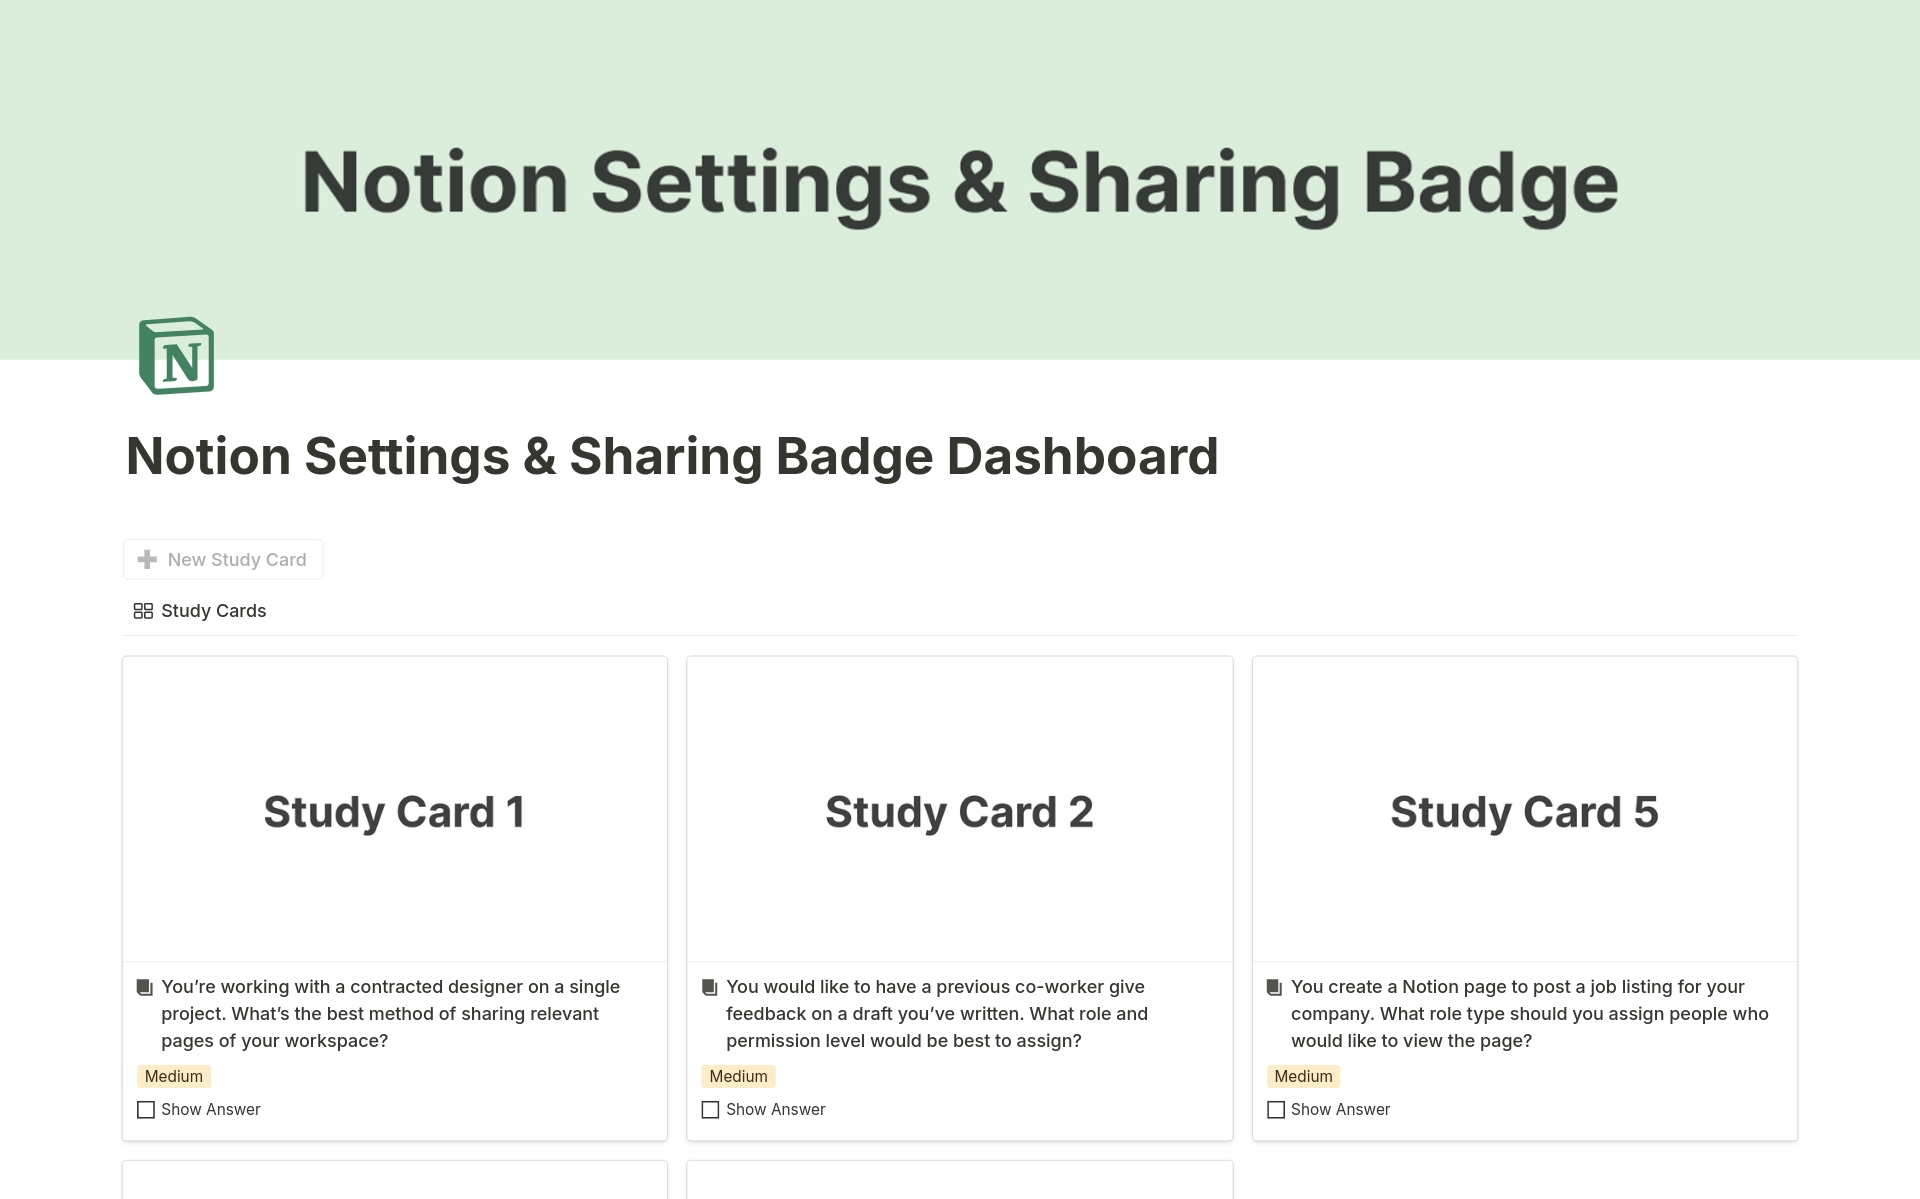 Notion Settings & Sharing Badge Study Cards

🚀 Earn Your Notion Settings & Sharing Badge with Confidence: Your Path to Mastery Starts Here 🚀